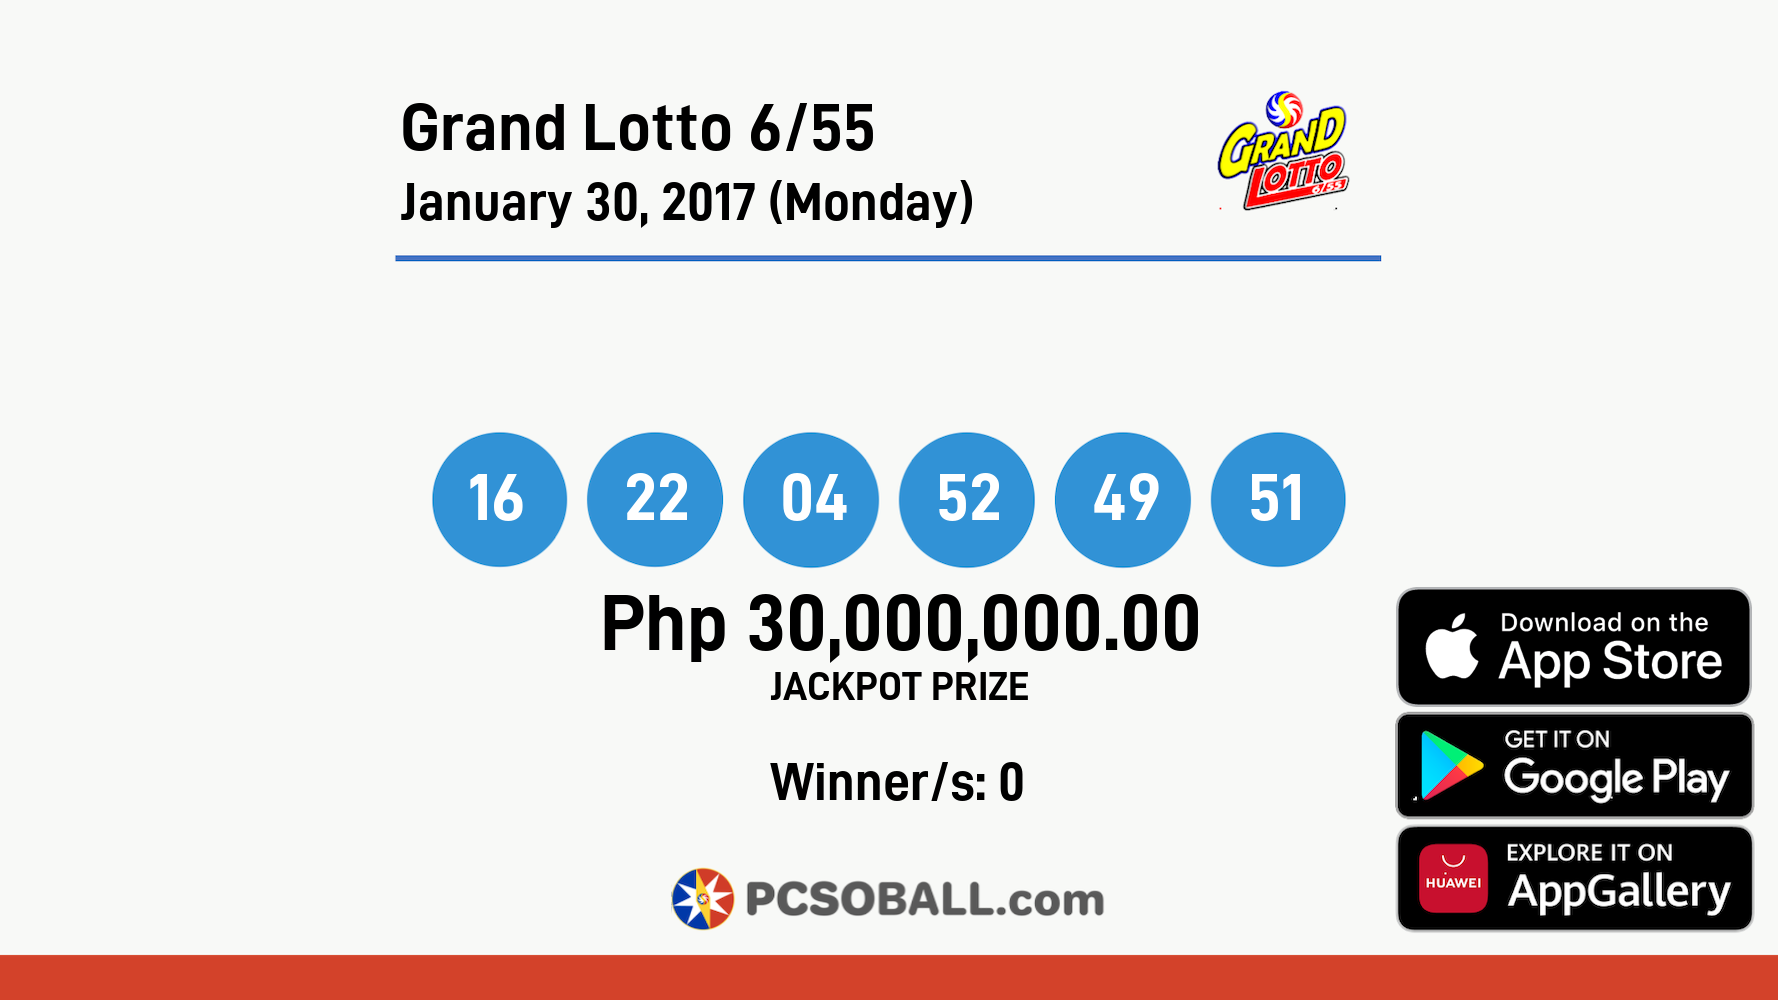 Grand Lotto 6/55 January 30, 2017 (Monday) Result